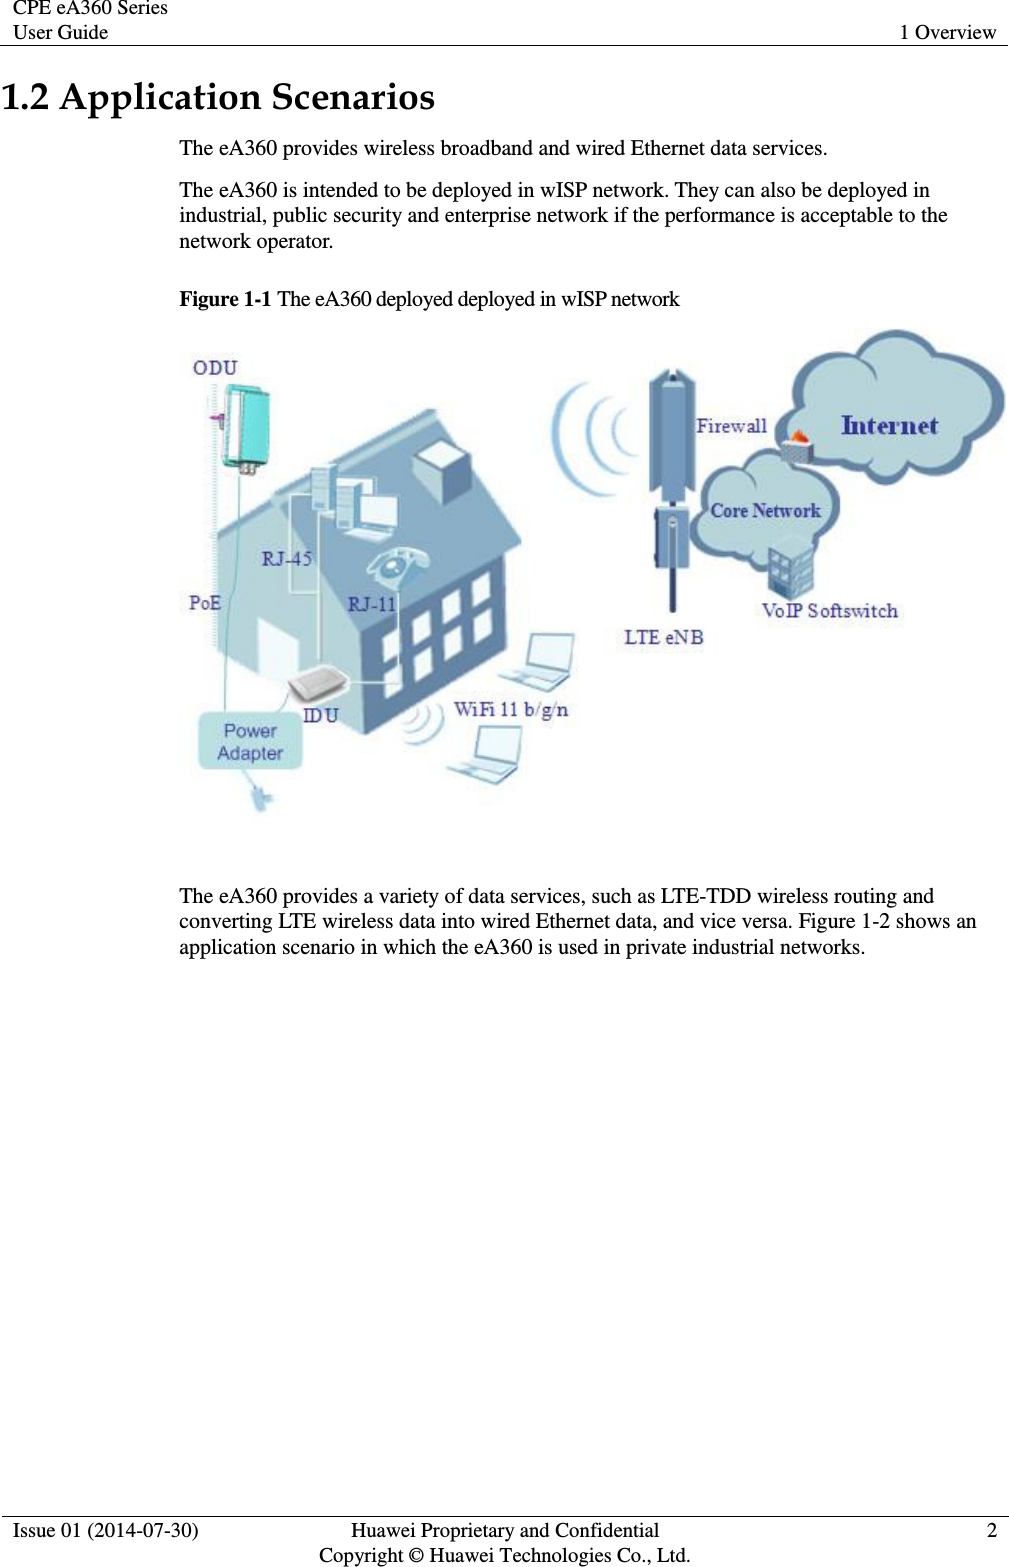 CPE eA360 Series User Guide 1 Overview  Issue 01 (2014-07-30) Huawei Proprietary and Confidential                                     Copyright © Huawei Technologies Co., Ltd. 2  1.2 Application Scenarios The eA360 provides wireless broadband and wired Ethernet data services. The eA360 is intended to be deployed in wISP network. They can also be deployed in industrial, public security and enterprise network if the performance is acceptable to the network operator. Figure 1-1 The eA360 deployed deployed in wISP network   The eA360 provides a variety of data services, such as LTE-TDD wireless routing and converting LTE wireless data into wired Ethernet data, and vice versa. Figure 1-2 shows an application scenario in which the eA360 is used in private industrial networks.   